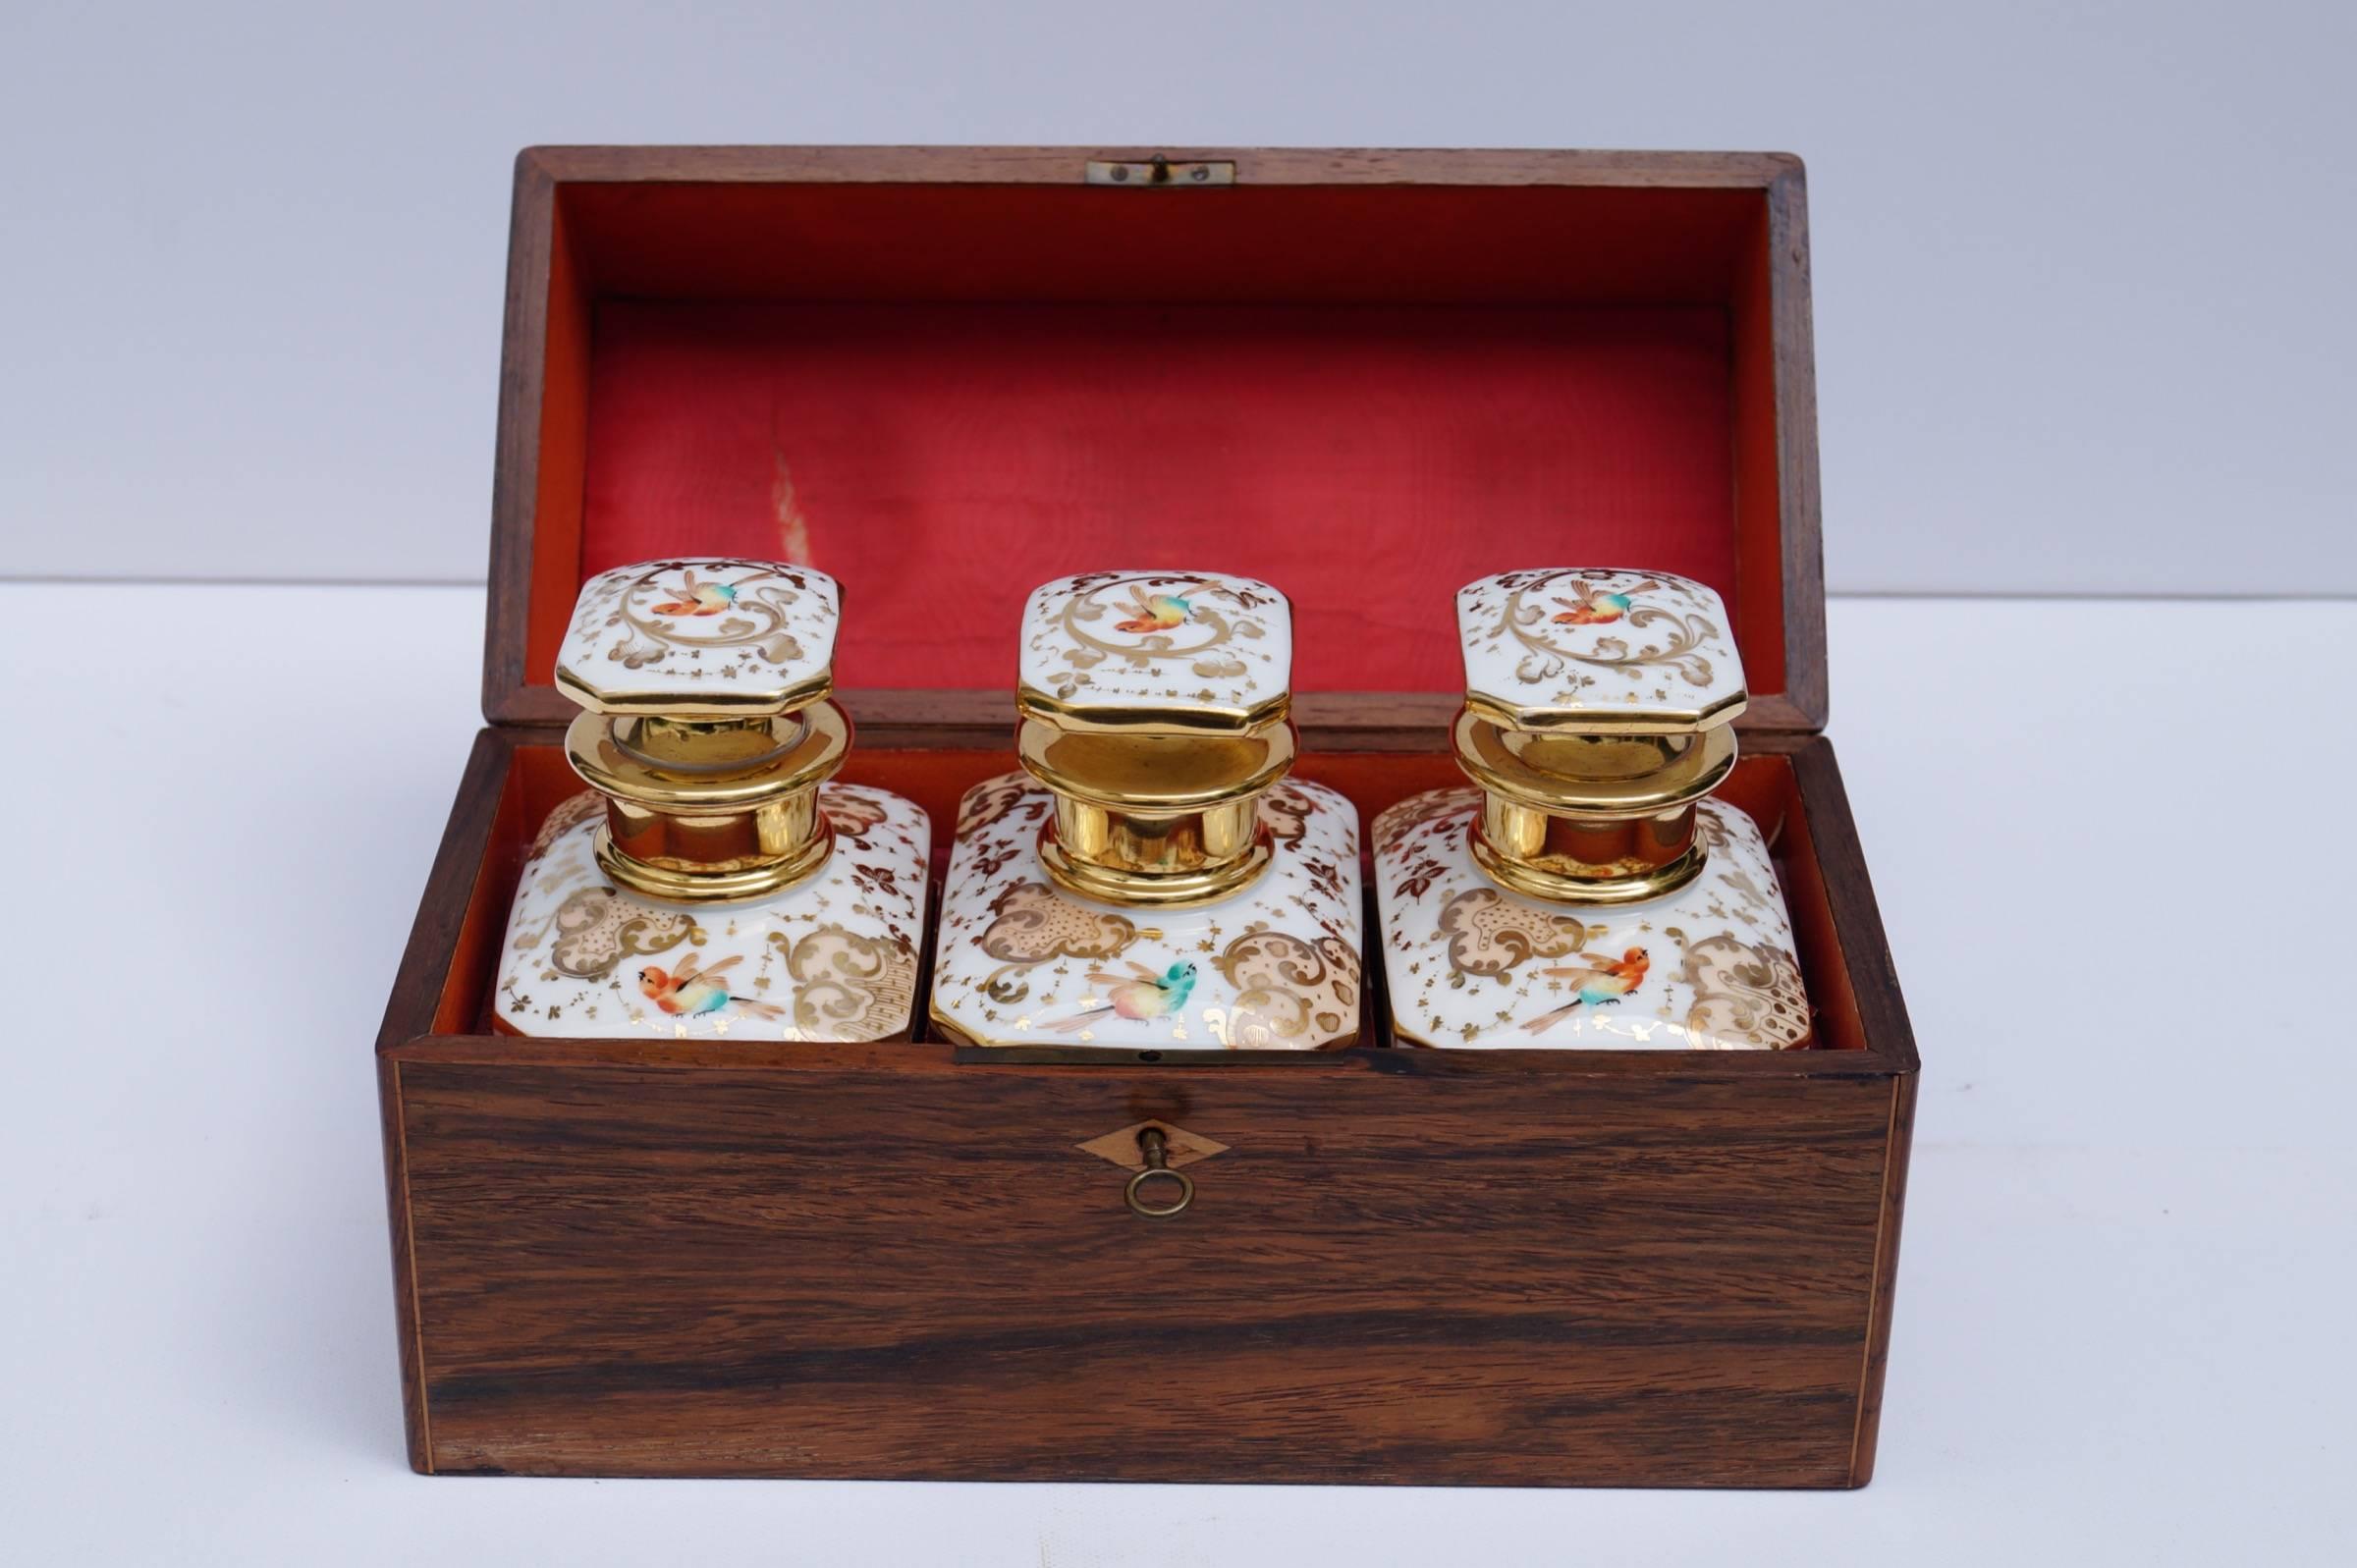 Rare early 19th century Old Paris porcelain hand-painted tea caddy's in wooden box

France, 1800-1840
Comes with a handwritten note from 1838 saying it was a wedding present for a Dutch couple.
Wooden box with three bottles [two with stop and